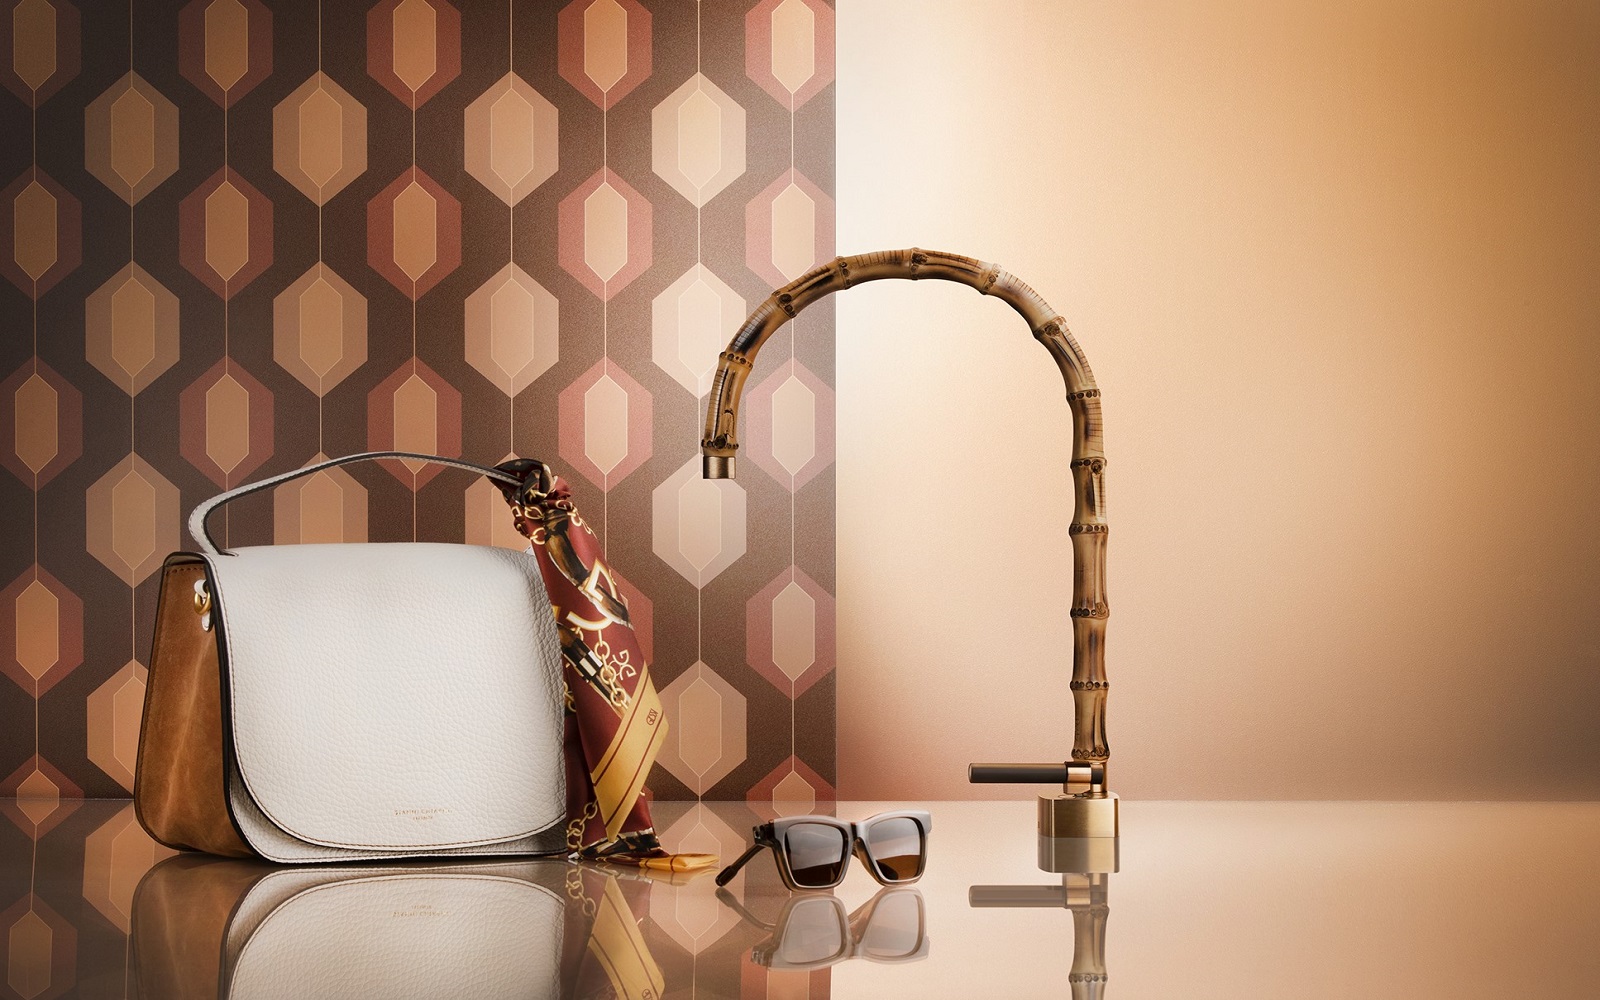 bamboo bathroom tap in the Jacqueline collection from Gessi with handbag and sunglasses